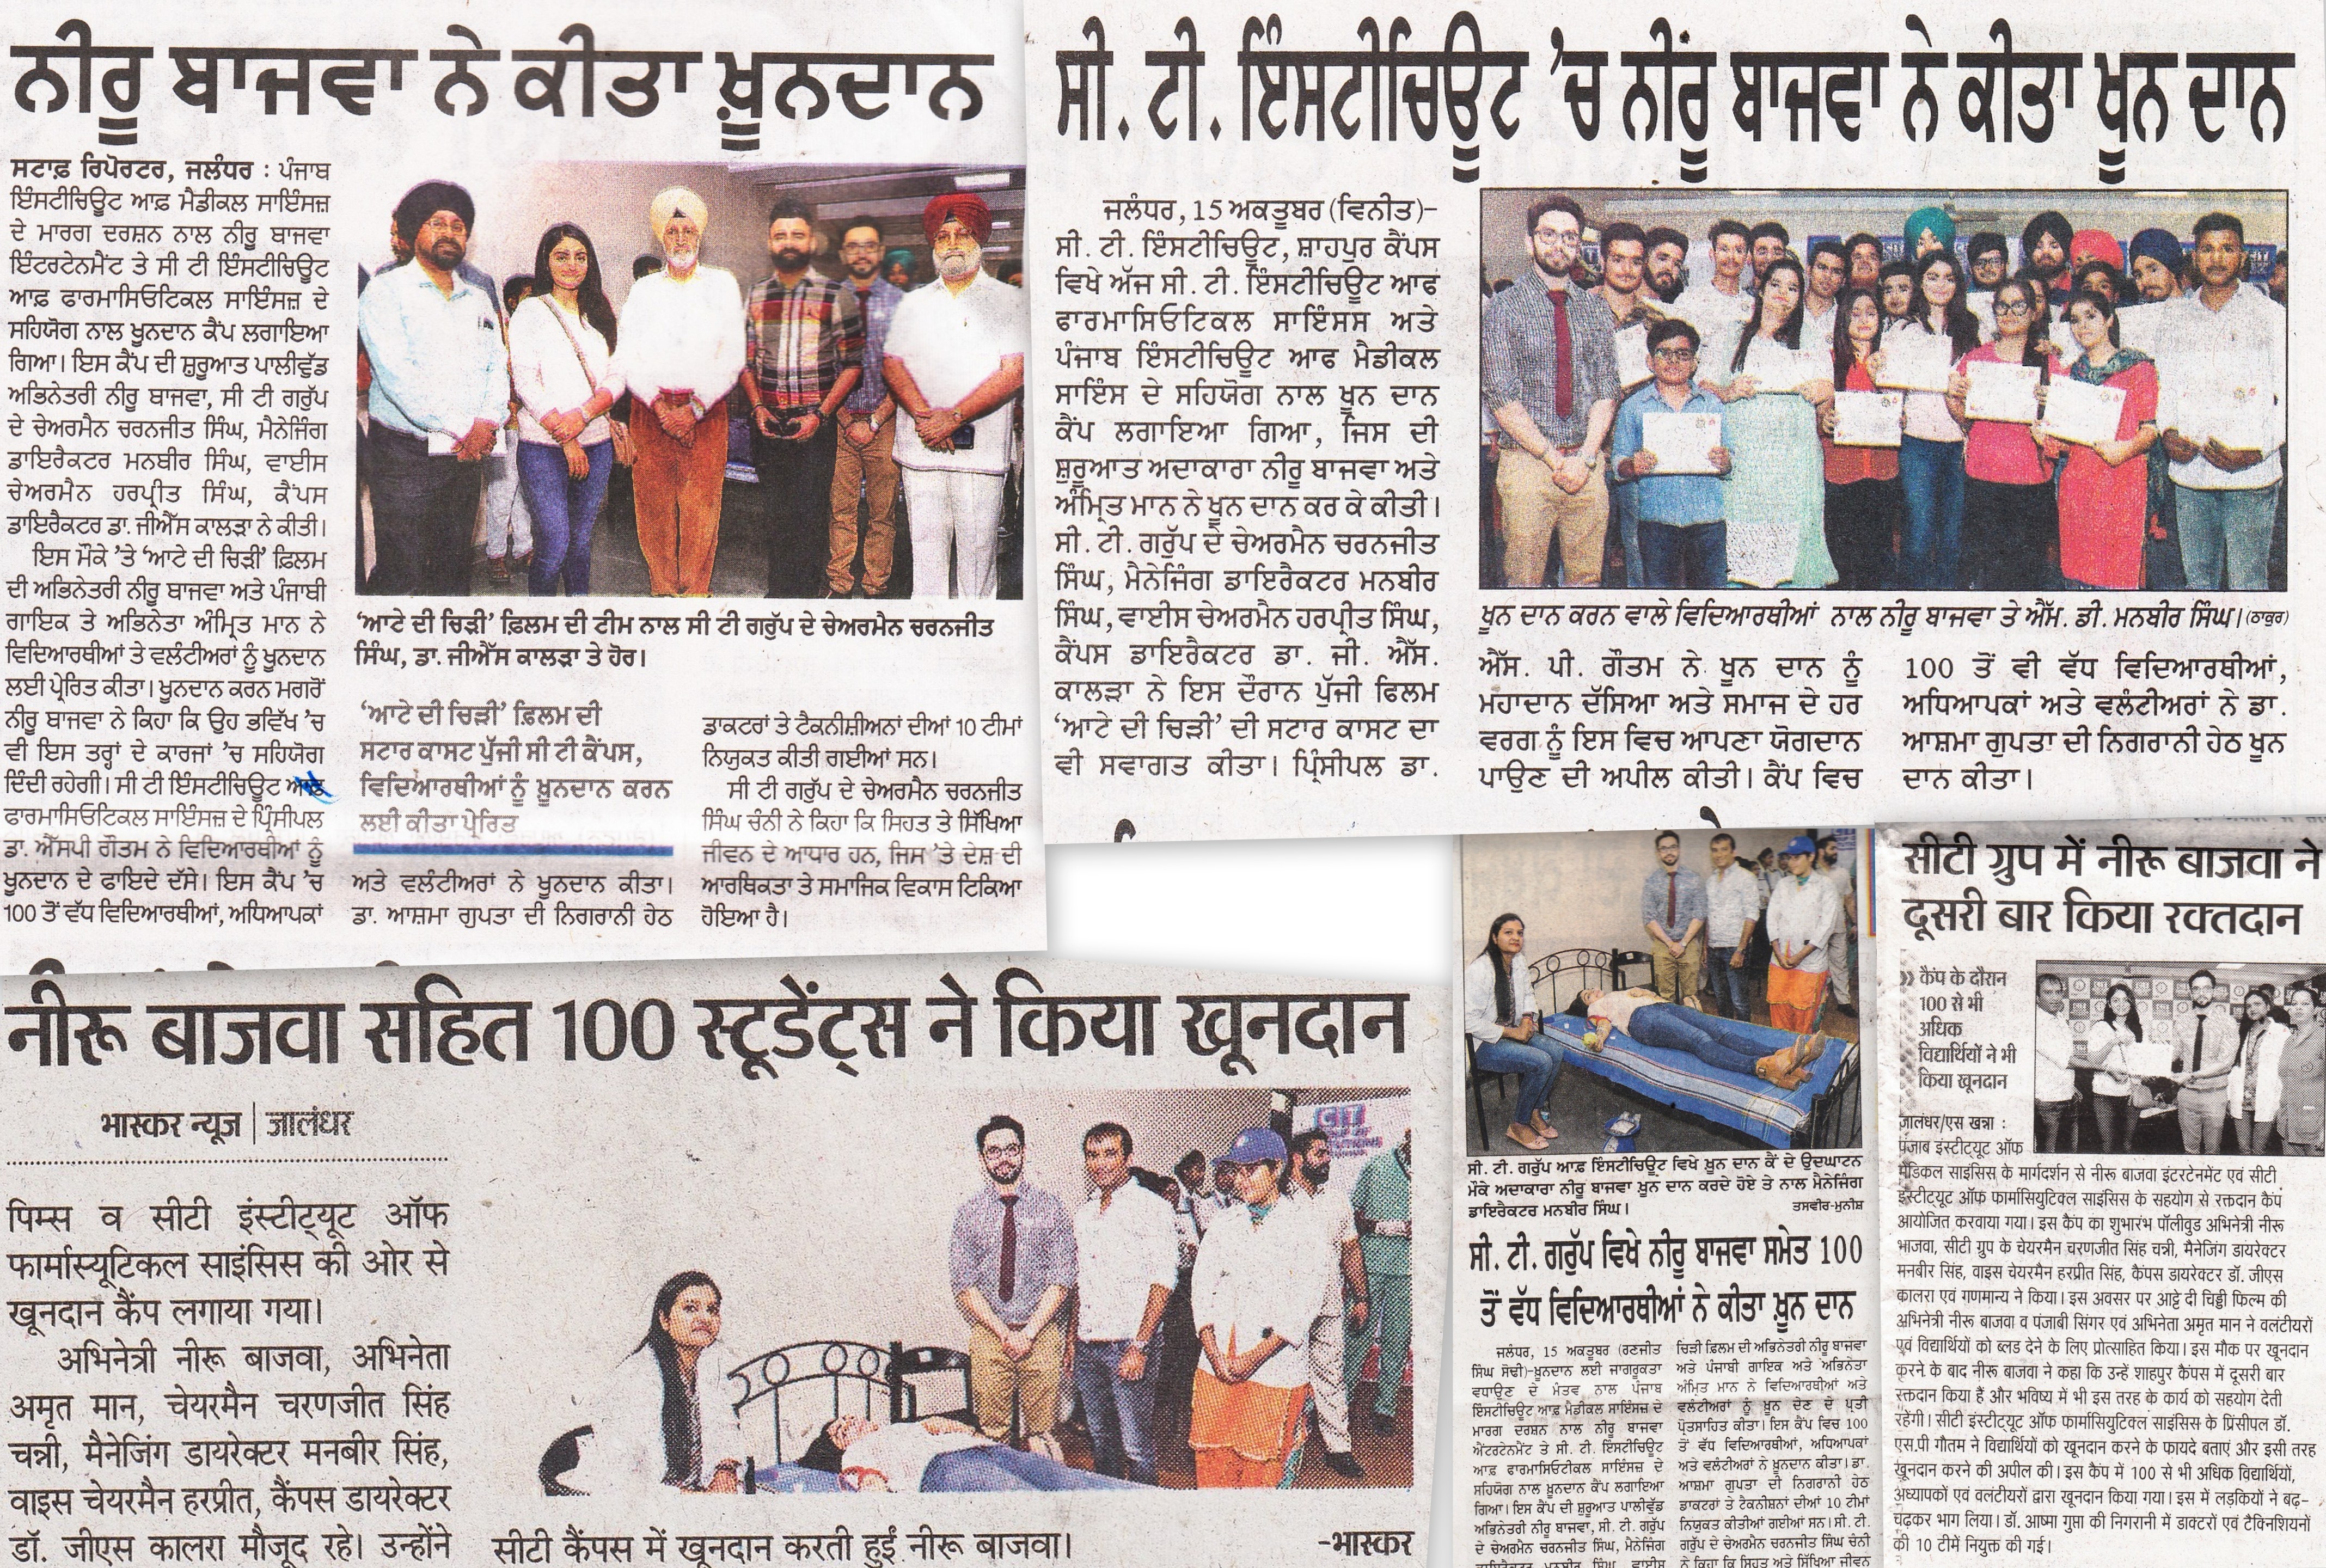 Blood Donation Camp at CT Institute, Chief Guest Pollywood Actress Neeru Bajwa